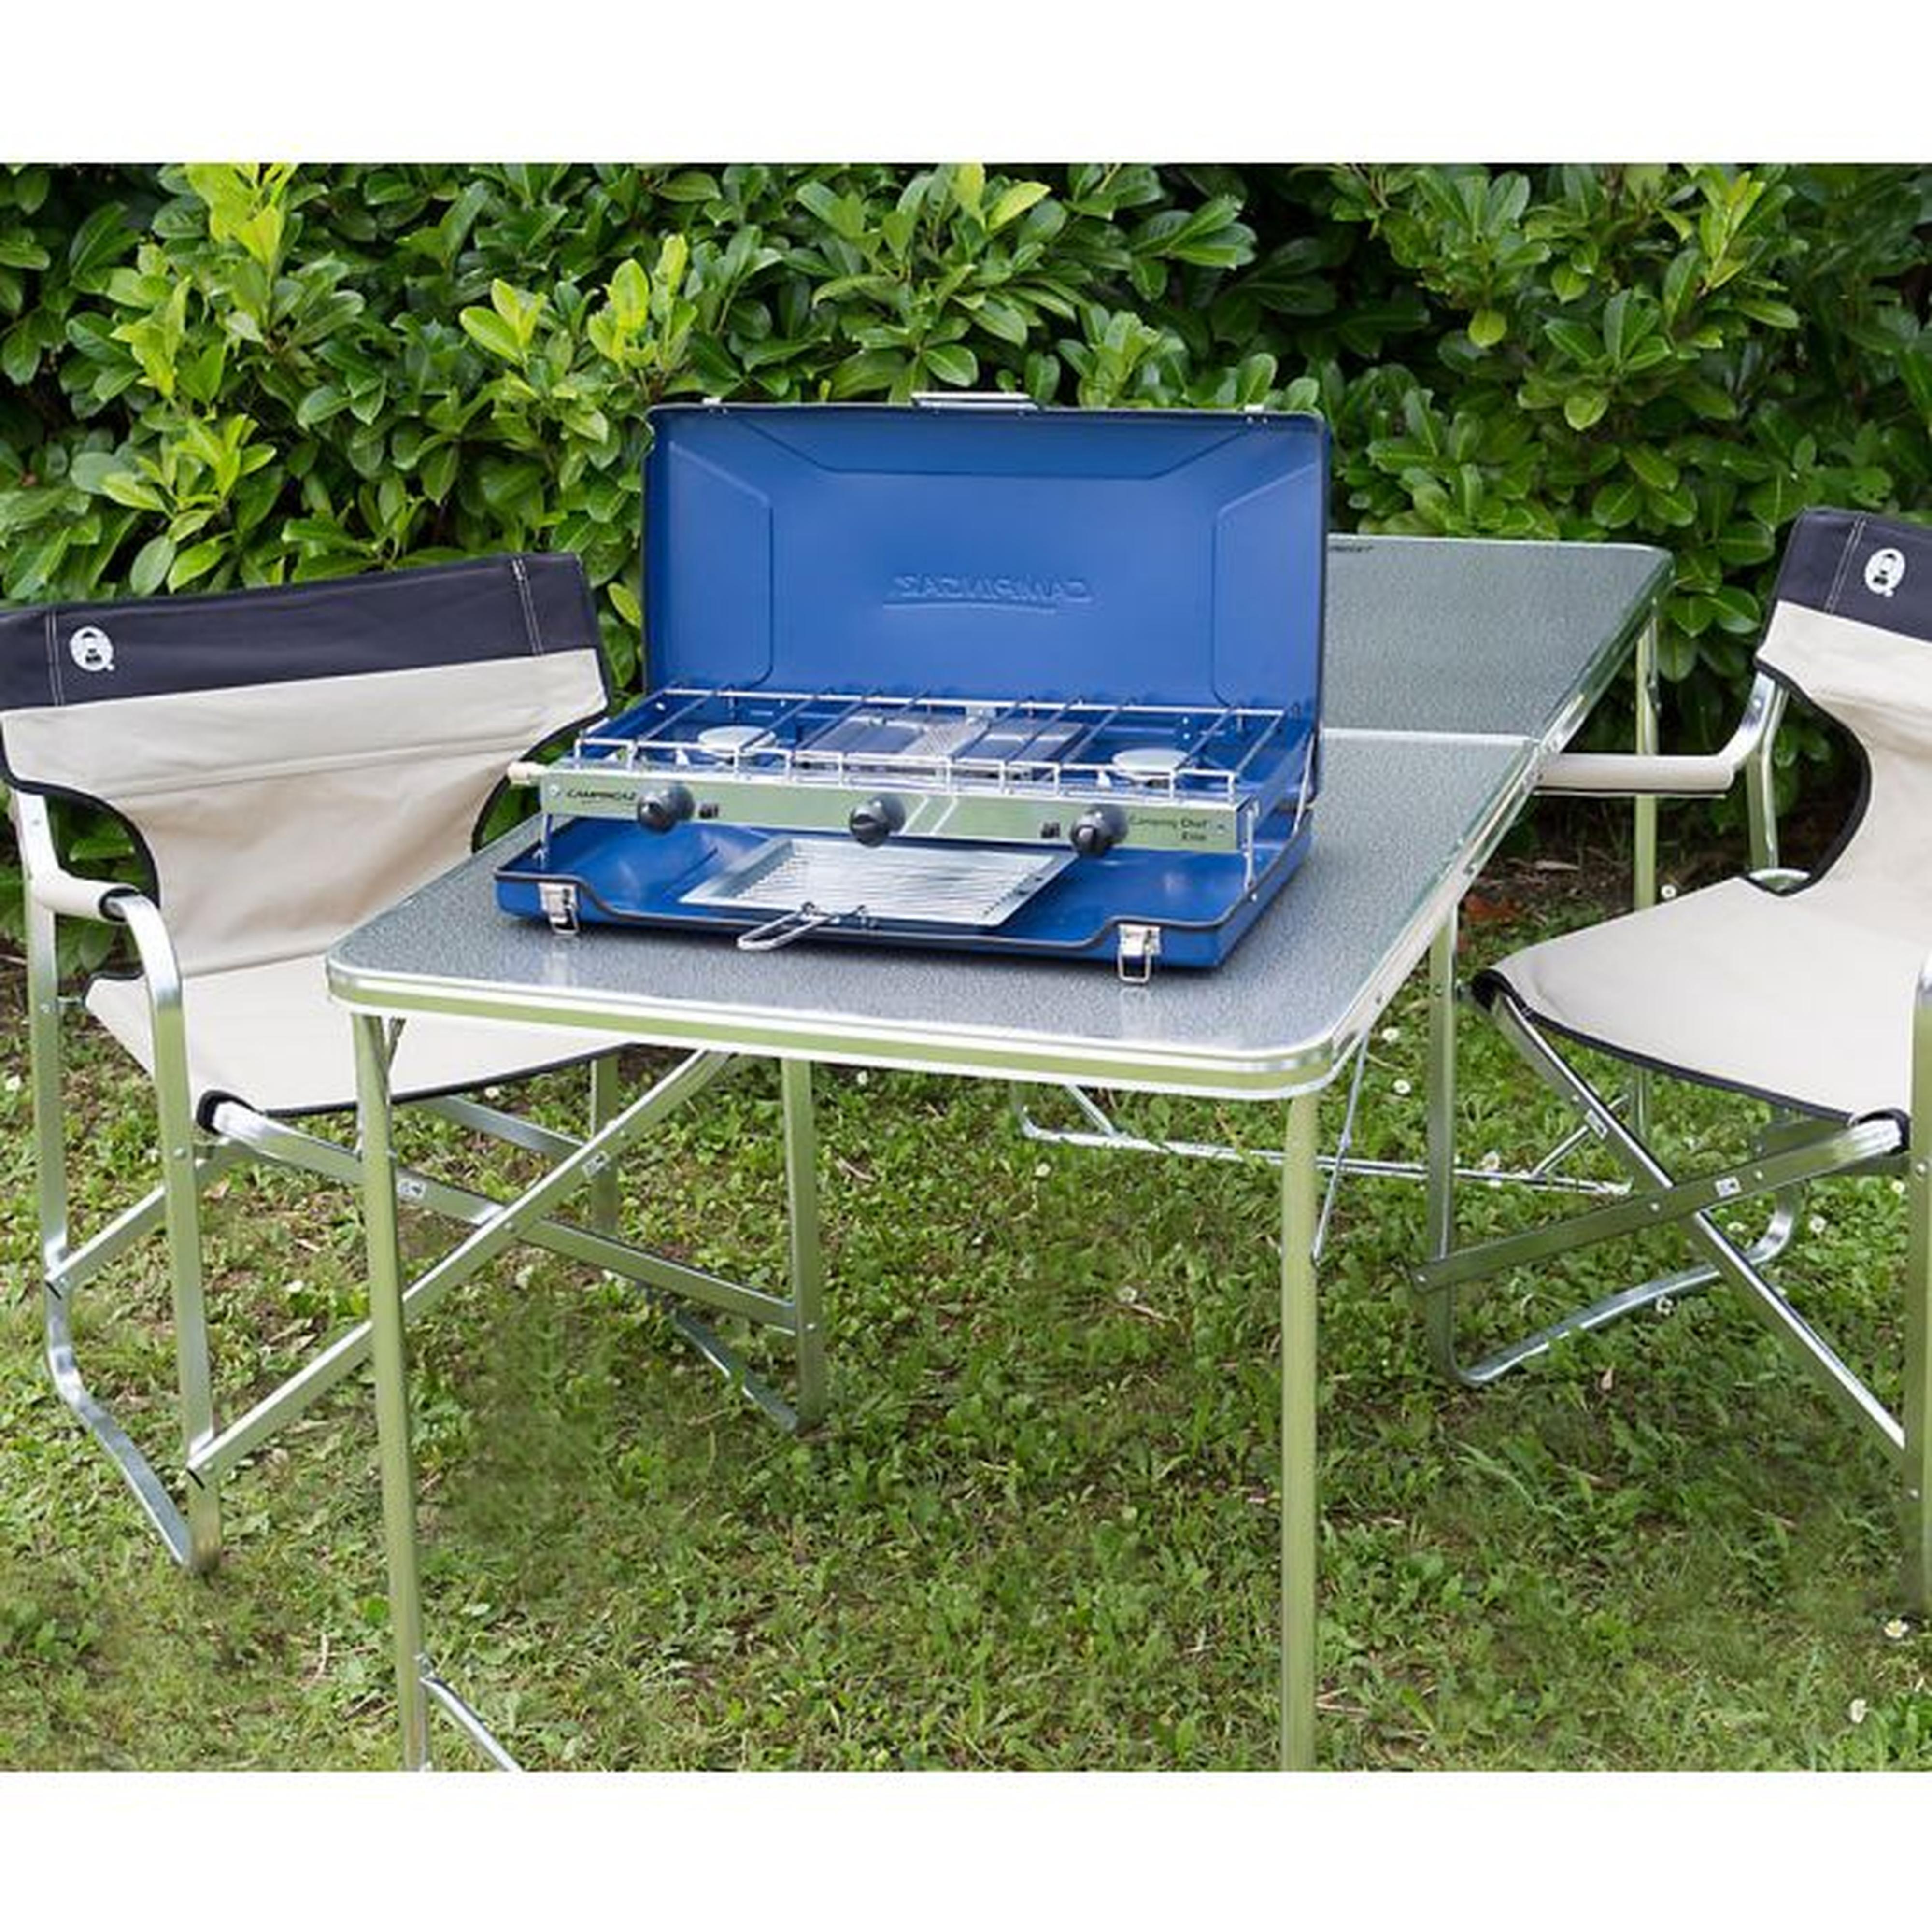 Campingaz Camping Chef Double Burner & Grill Gas Stove - in use on a camping table